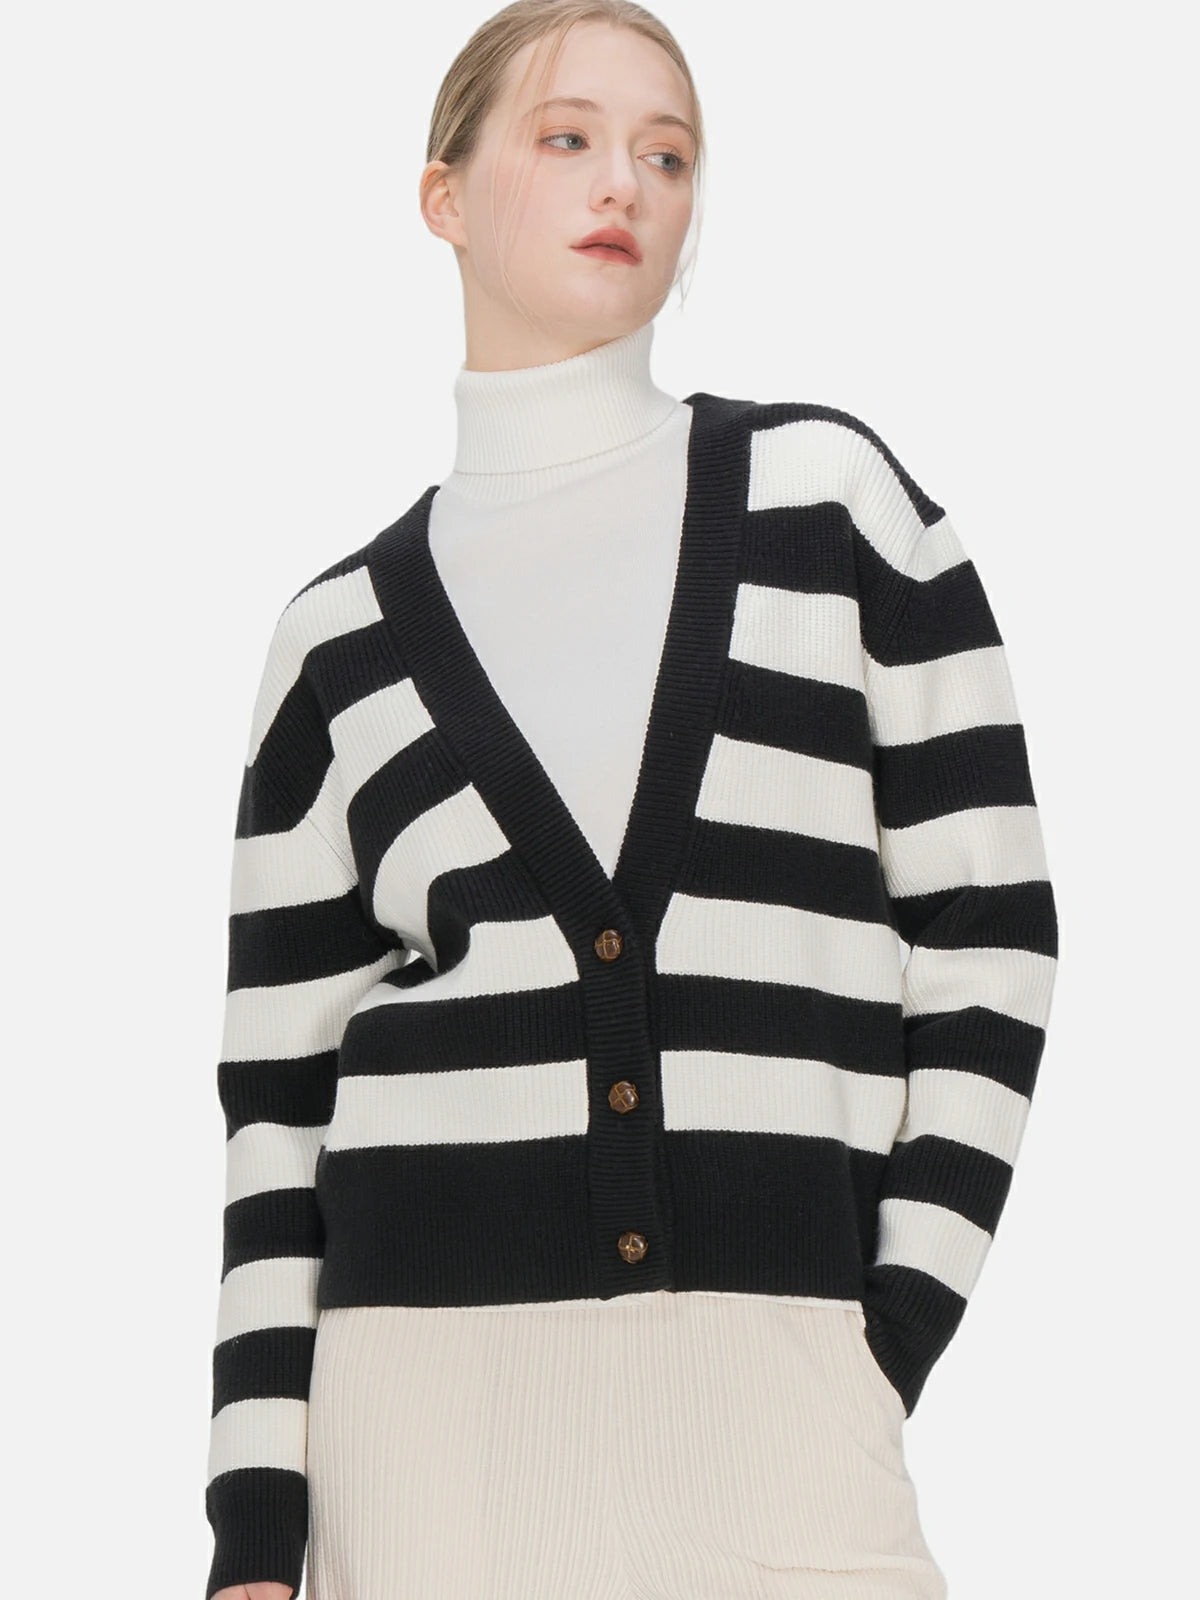 Achieve a contemporary look with this black and white striped V-neck cardigan, boasting a loose fit and elegant button details, seamlessly blending sophistication and relaxed style.